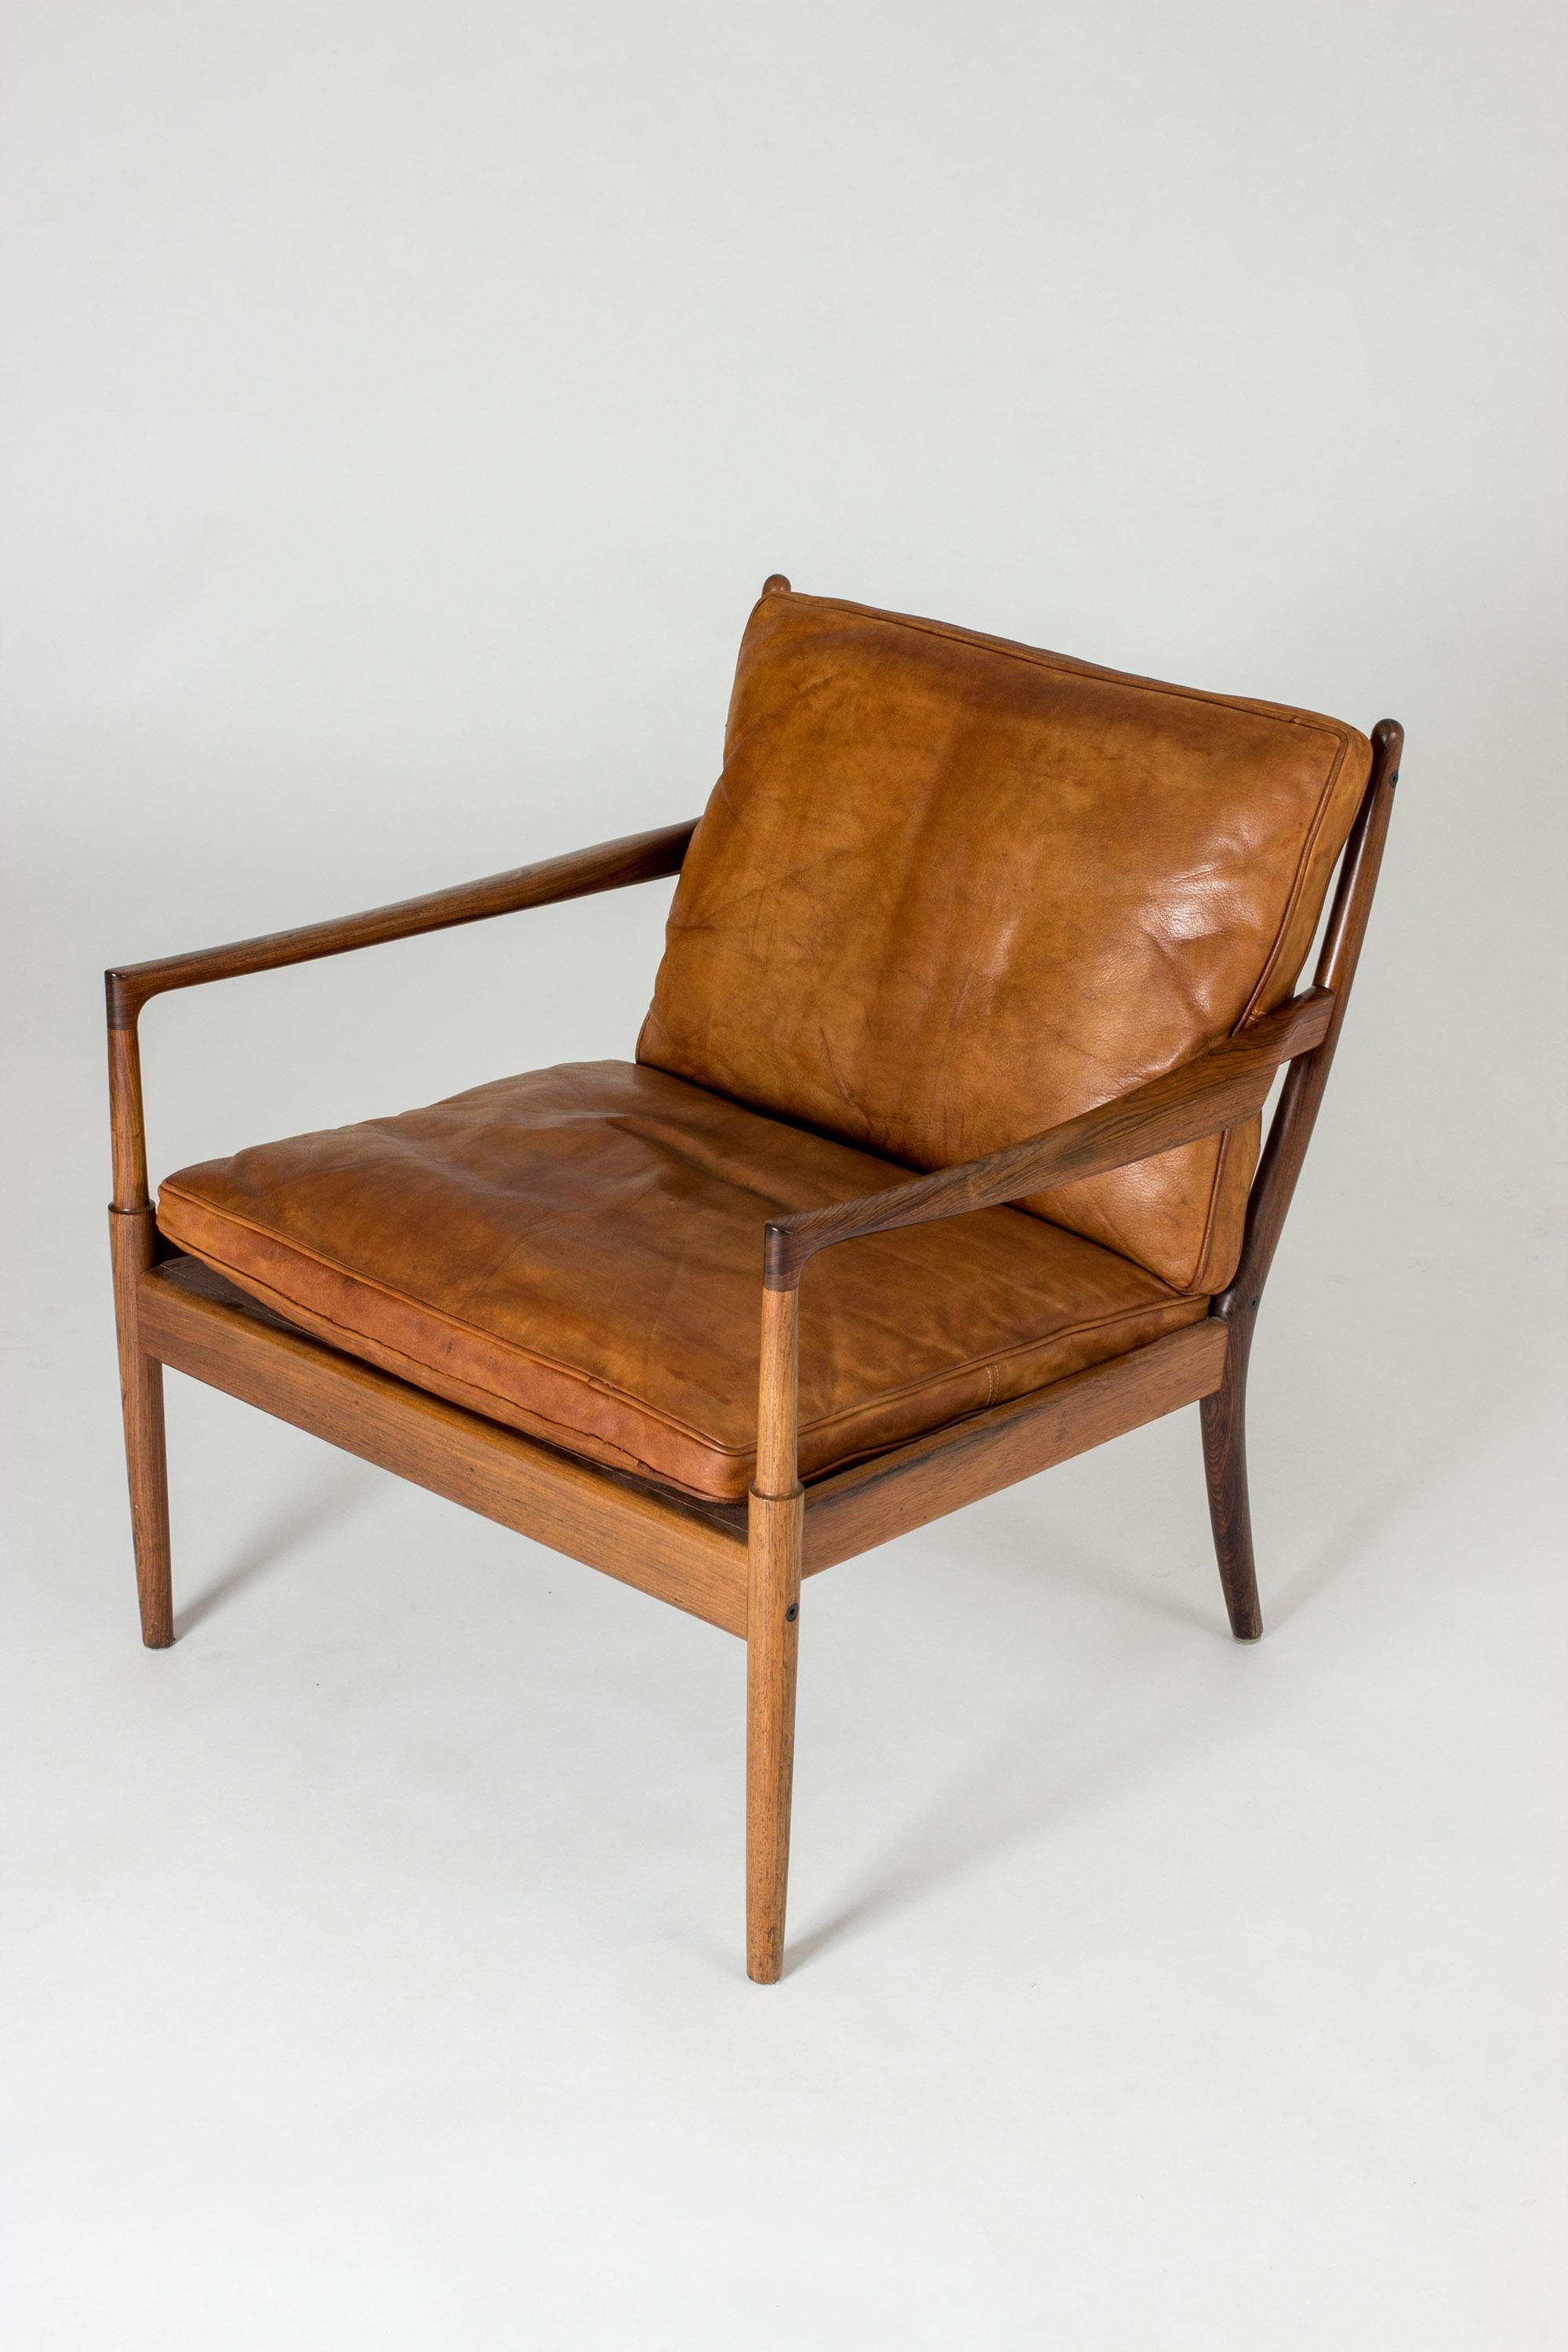 Pair of Rosewood and Leather “Samsö” Lounge Chairs by Ib Kofod Larsen 7